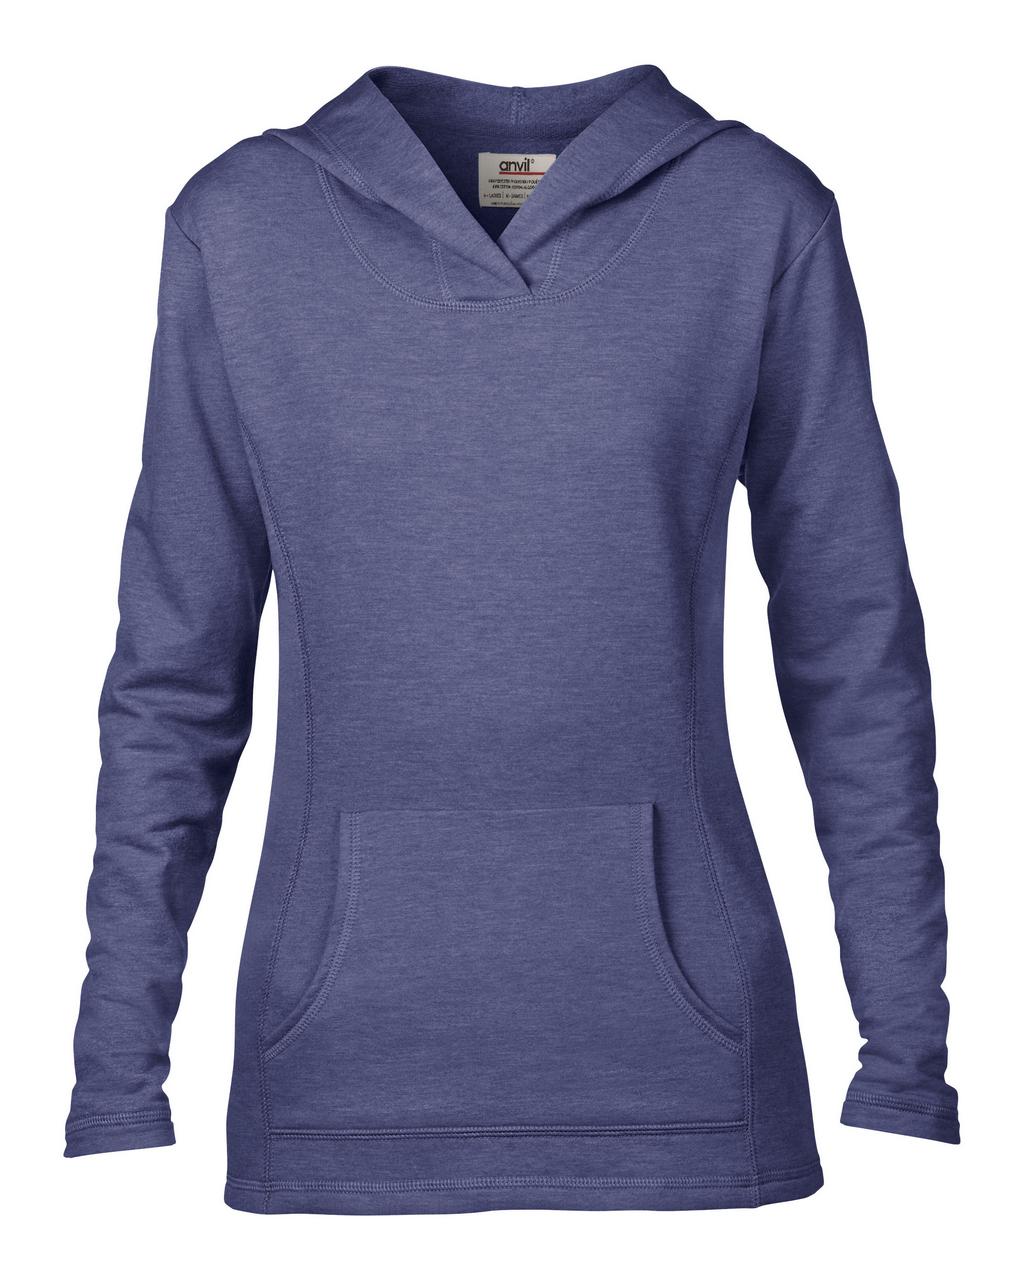 Promo  WOMEN’S HOODED FRENCH TERRY